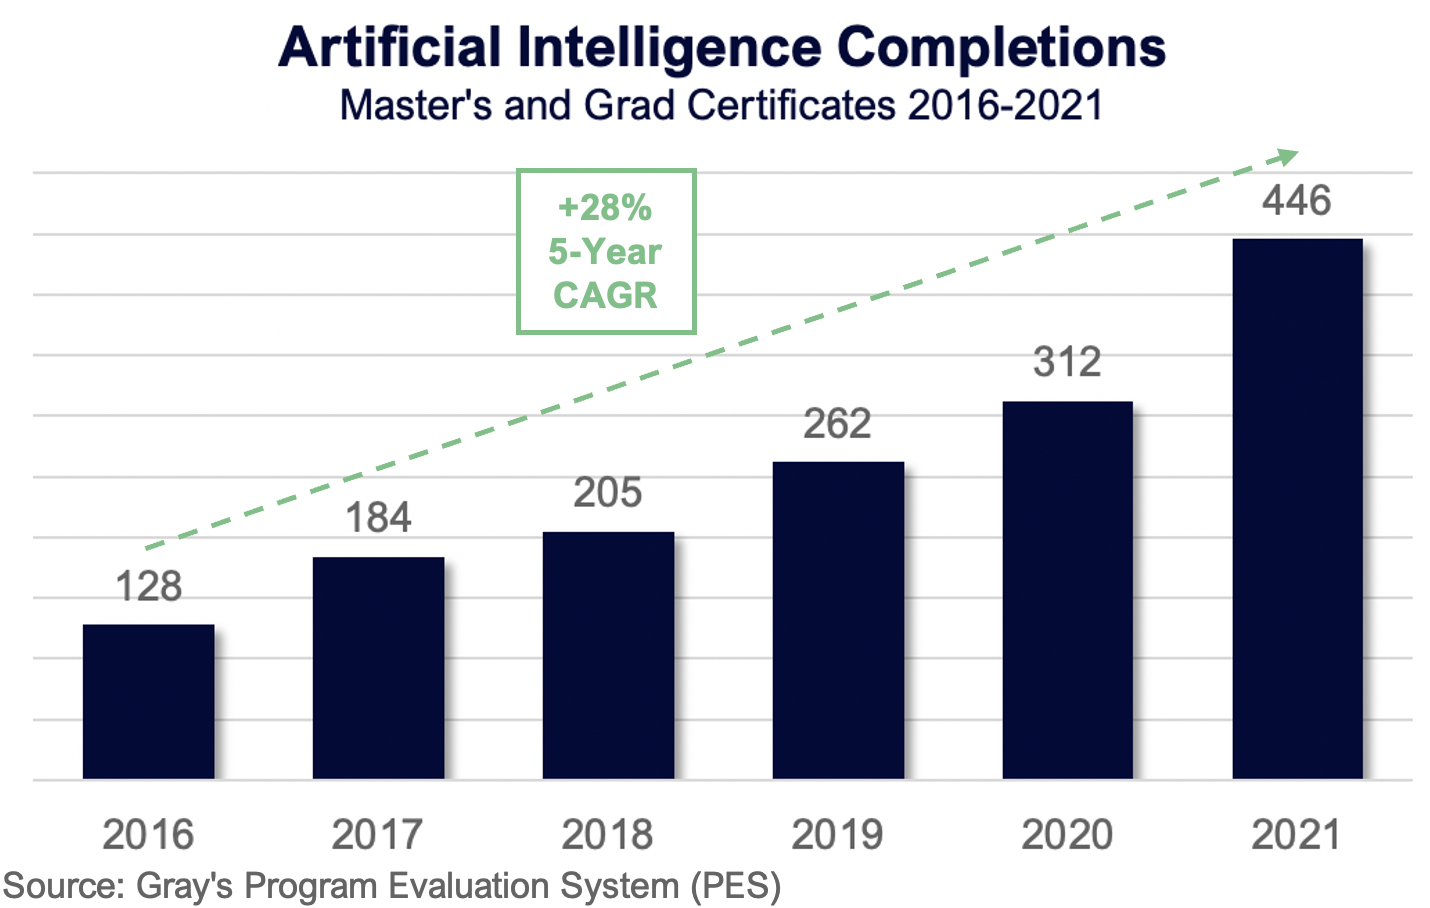 Artificial Intelligence Completions (Master's and Grad Certificates: 2016-2021)